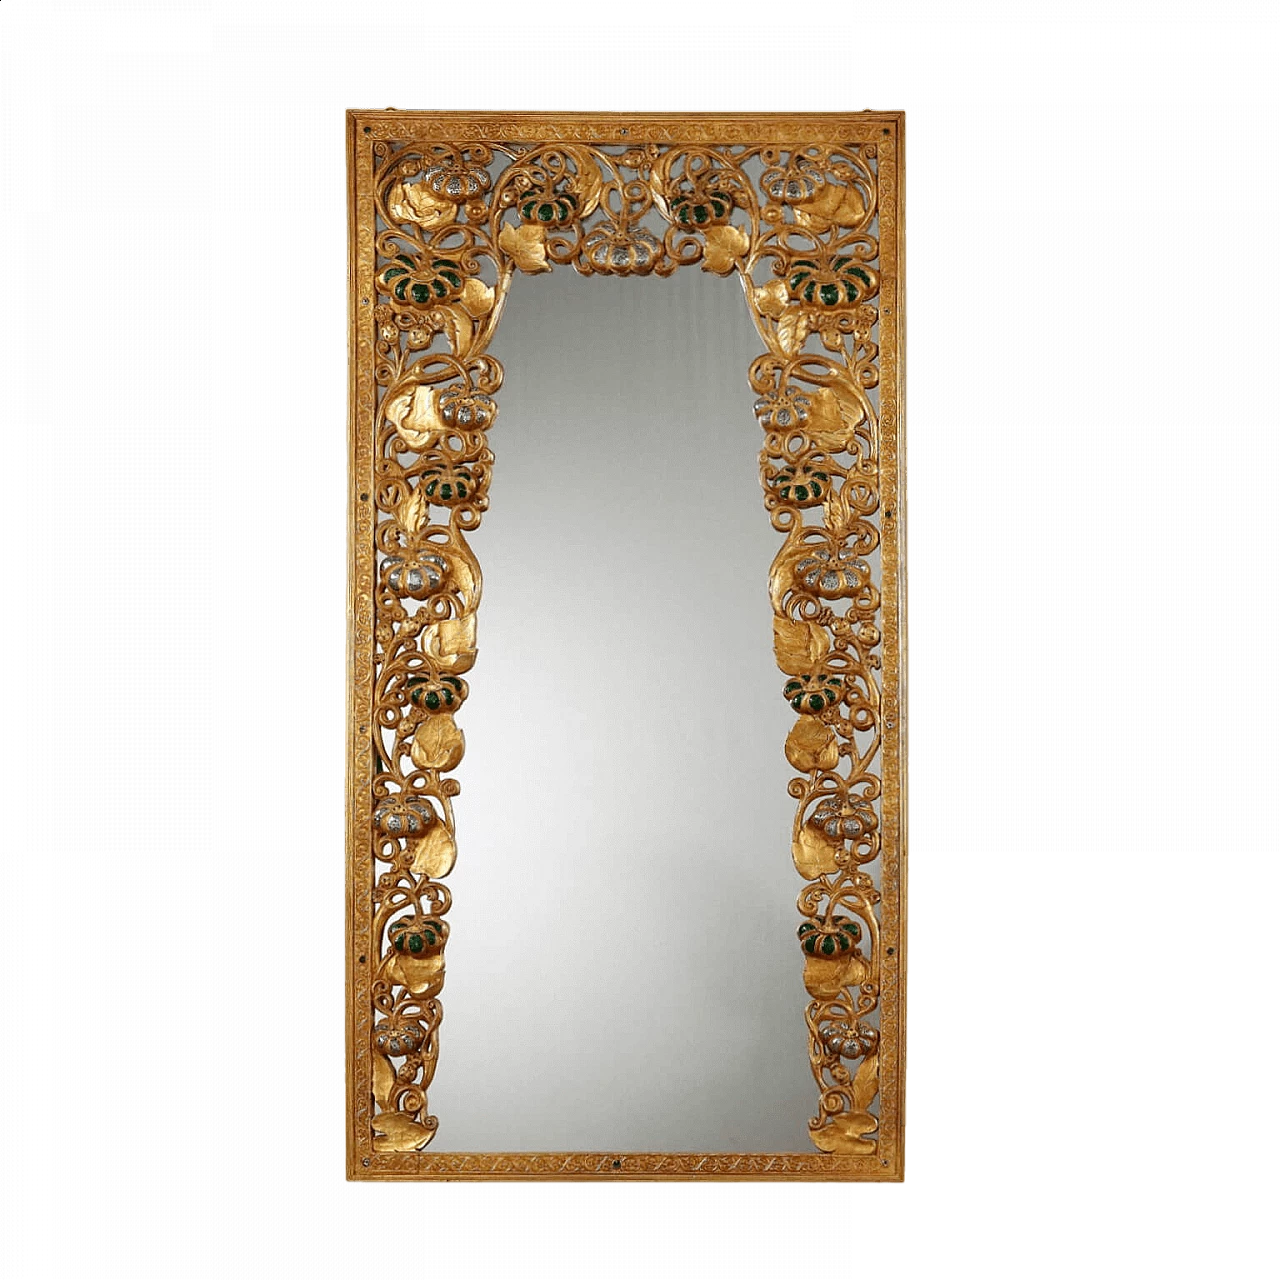 Oriental-style mirror carved with phytomorphic and floral motifs 11